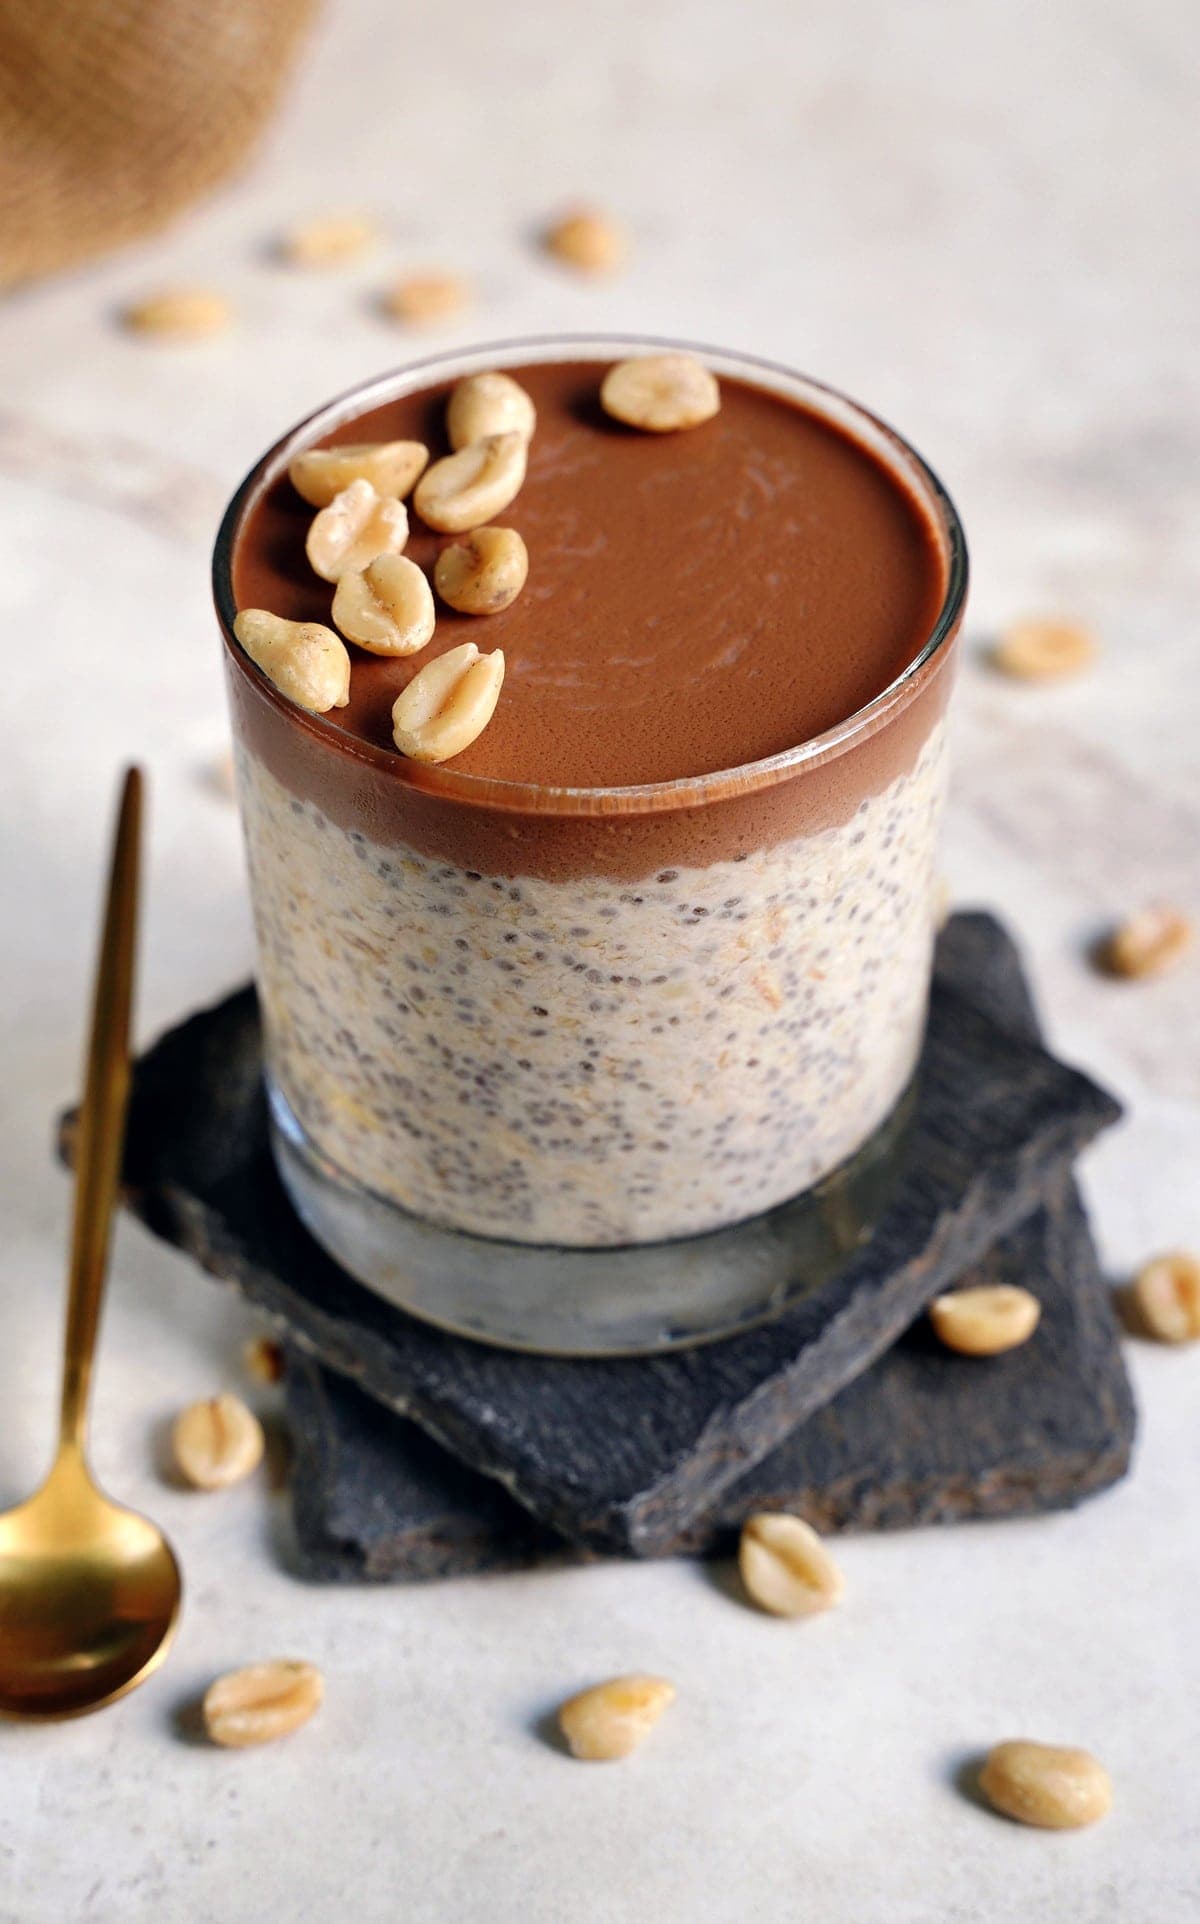 overnight chia oats with chocolate ganache in glass